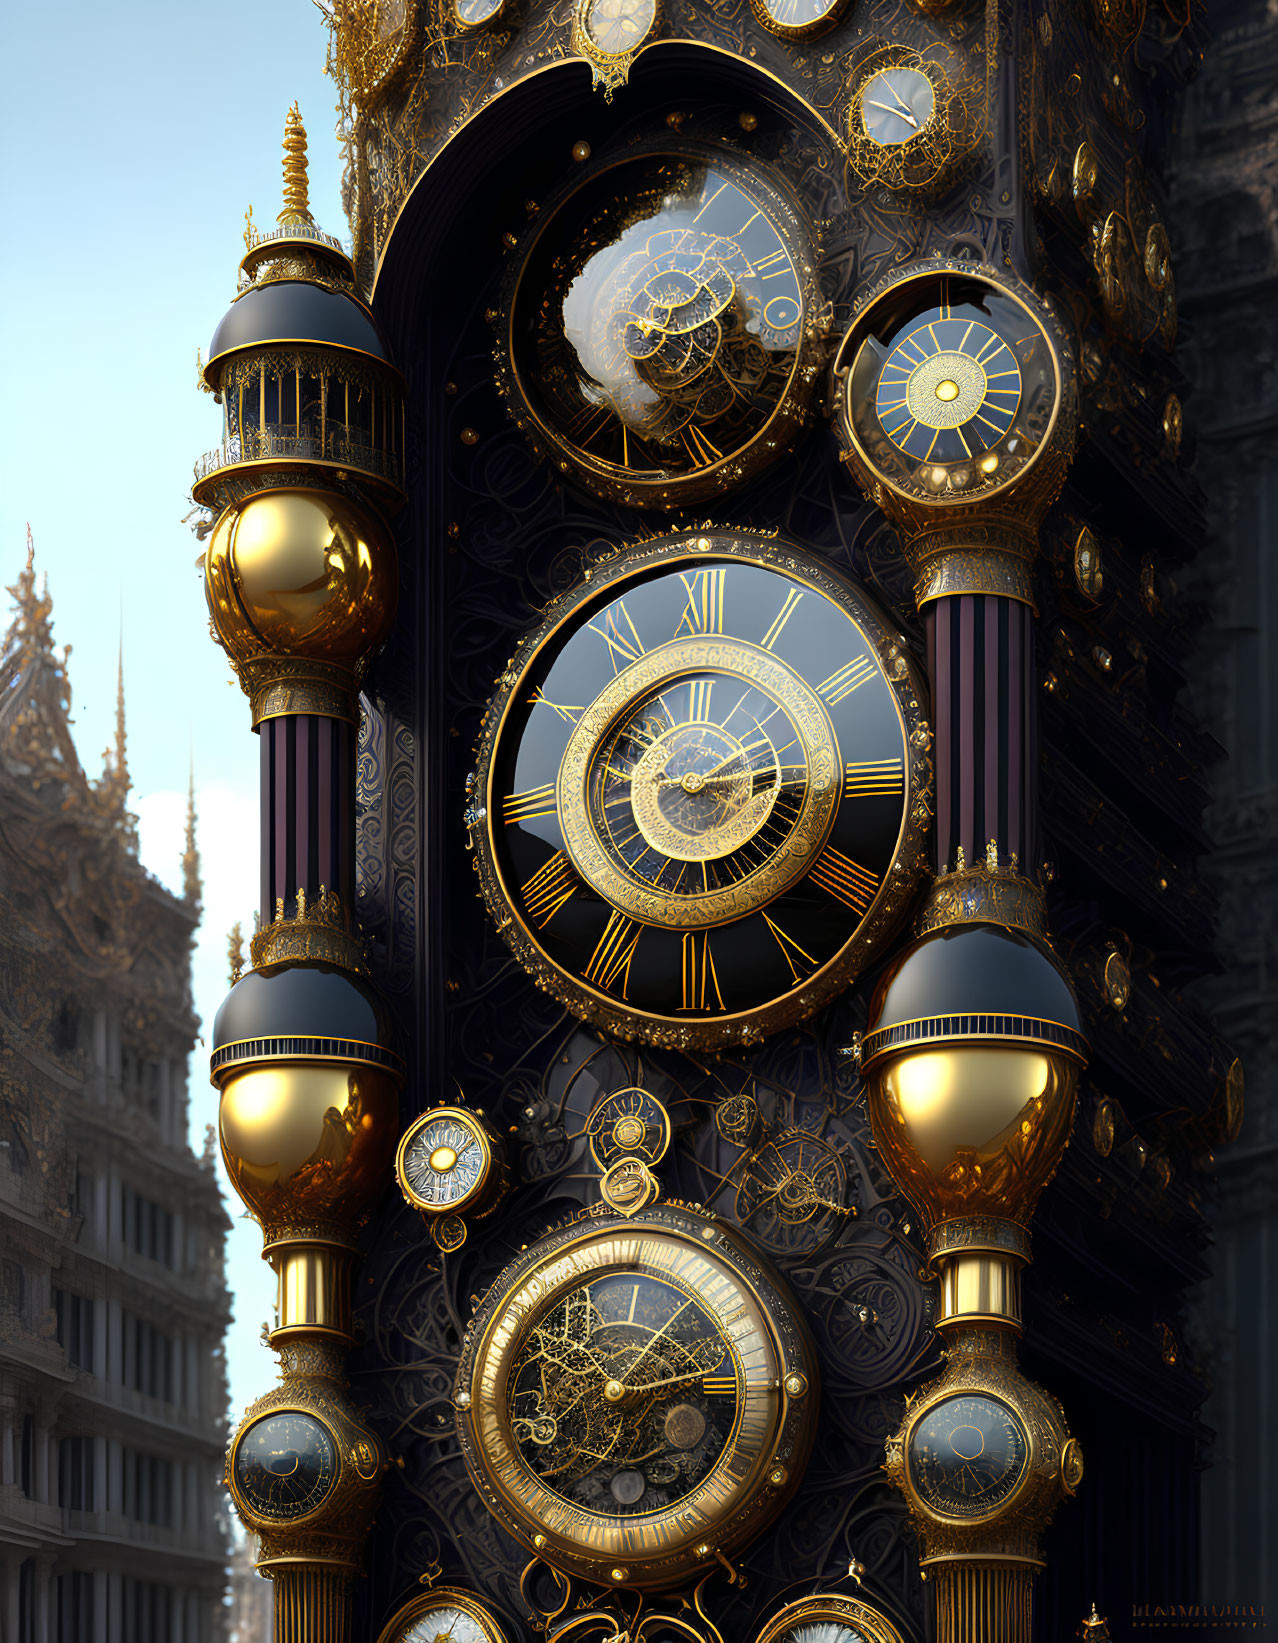 Intricate Golden Astronomical Clock in Gothic Setting